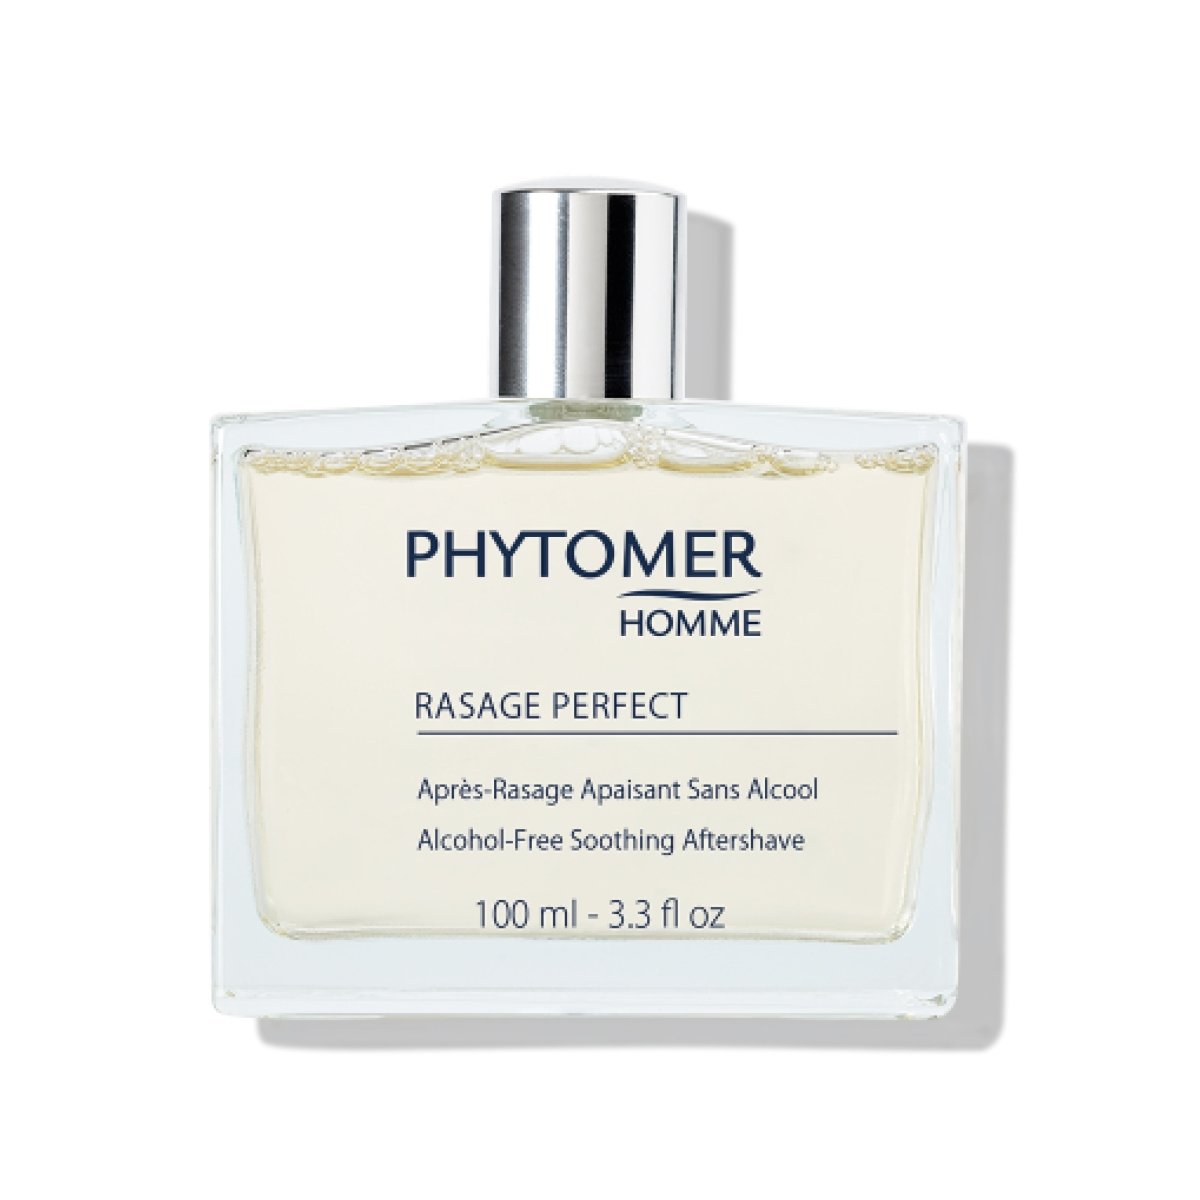 Phytomer Rasage Perfect Soothing After-Shave - SkincareEssentials